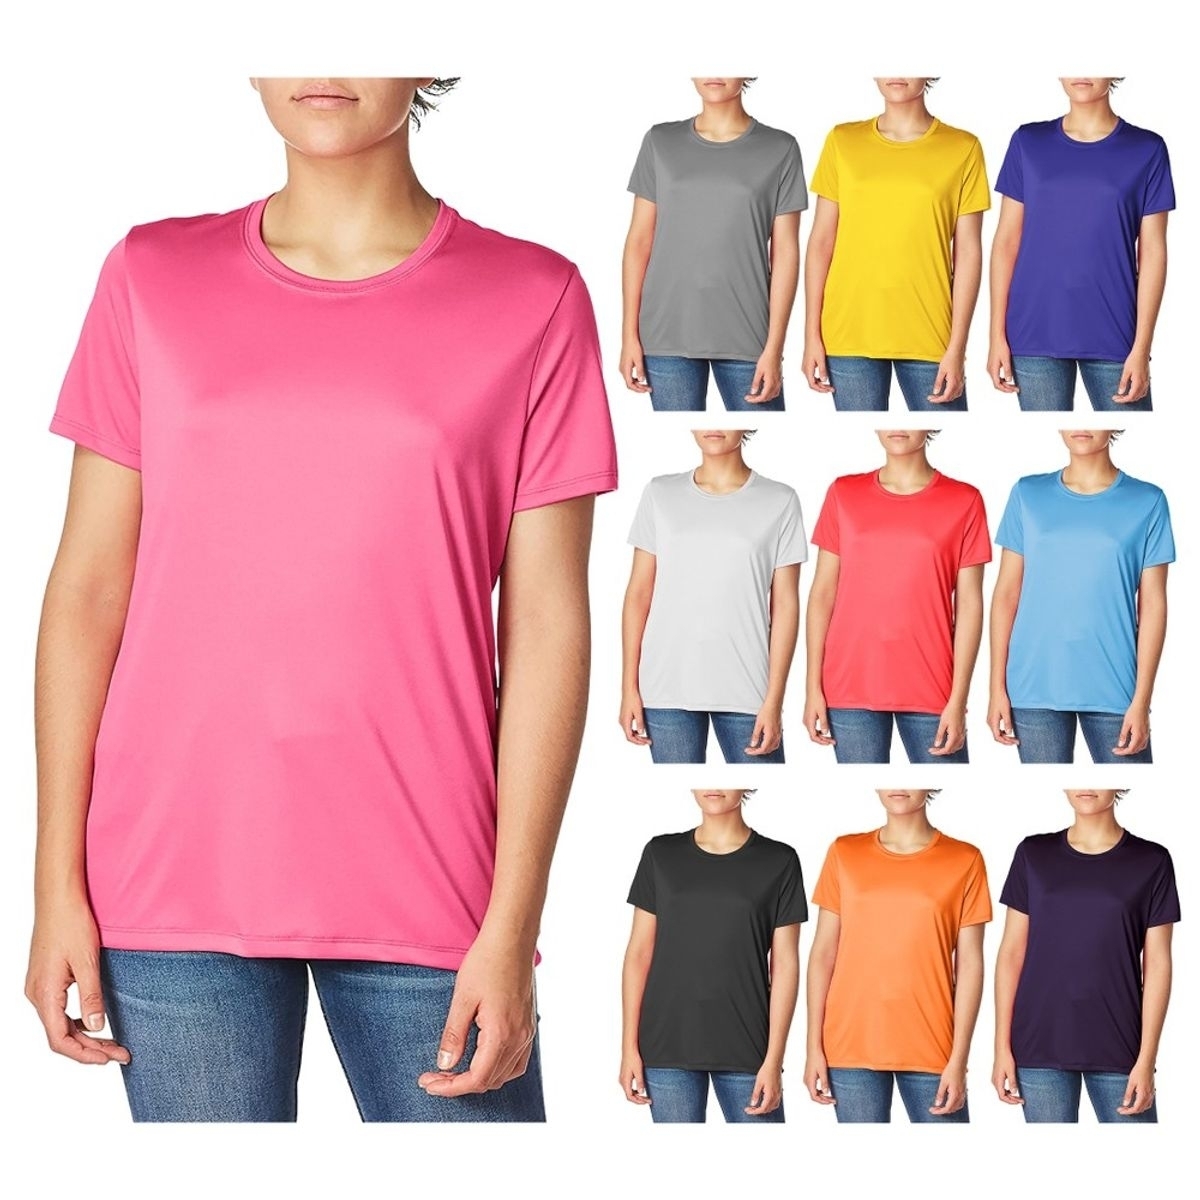 3-Pack: Women's Cool Dri-FIt Moisture Wicking Sim-Fit Long Sleeve Crew Neck T-Shirts - Small